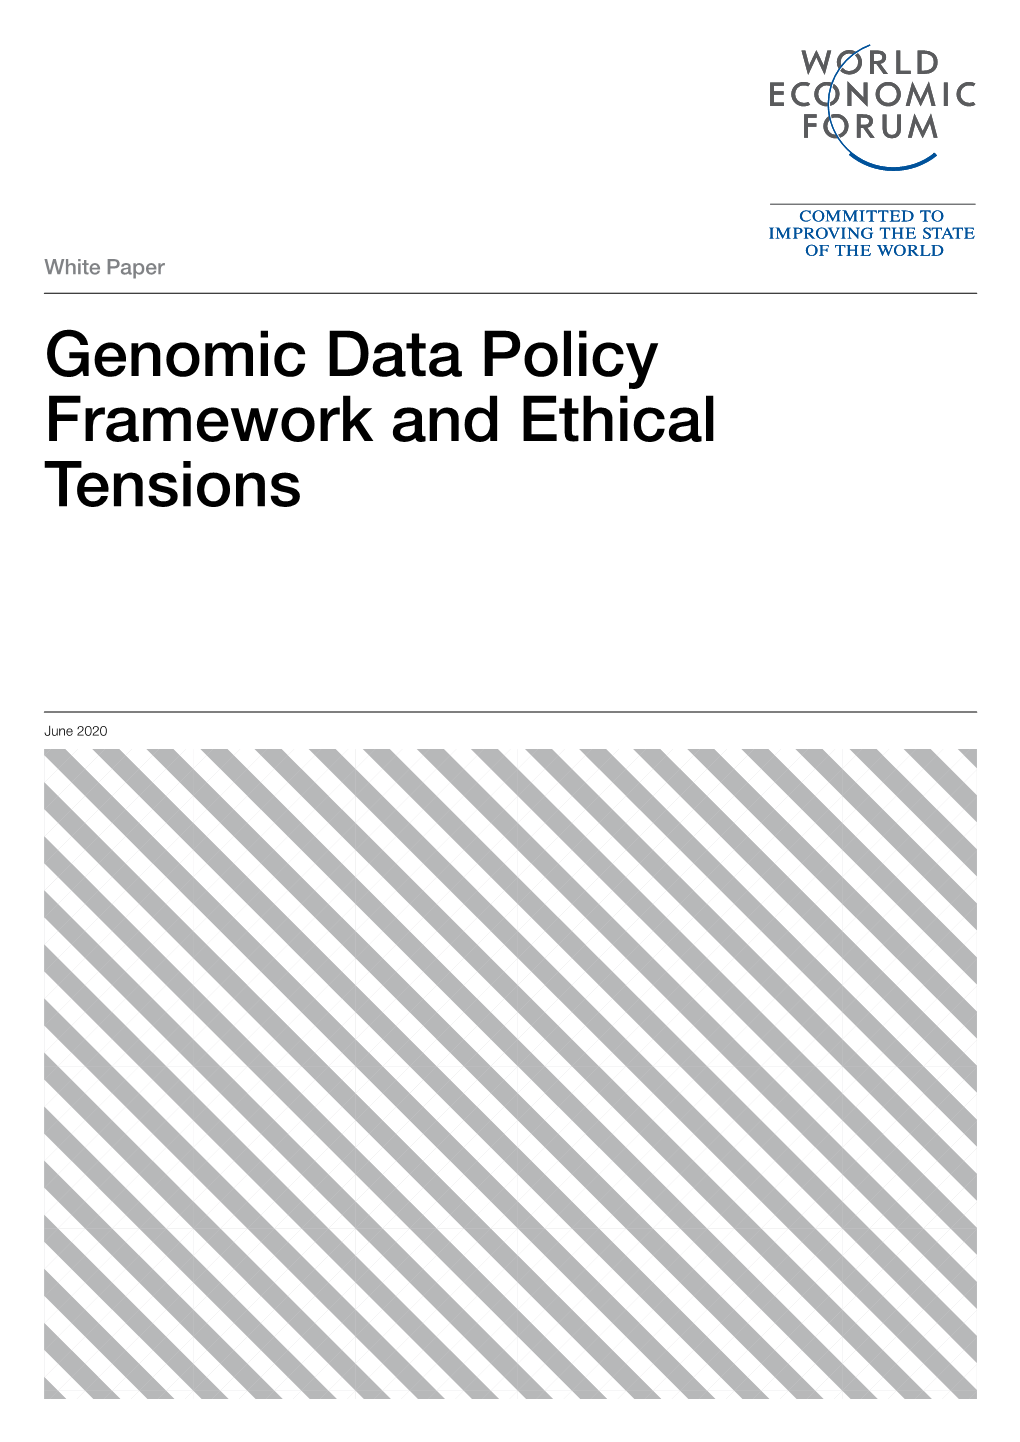 Genomic Data Policy Framework and Ethical Tensions